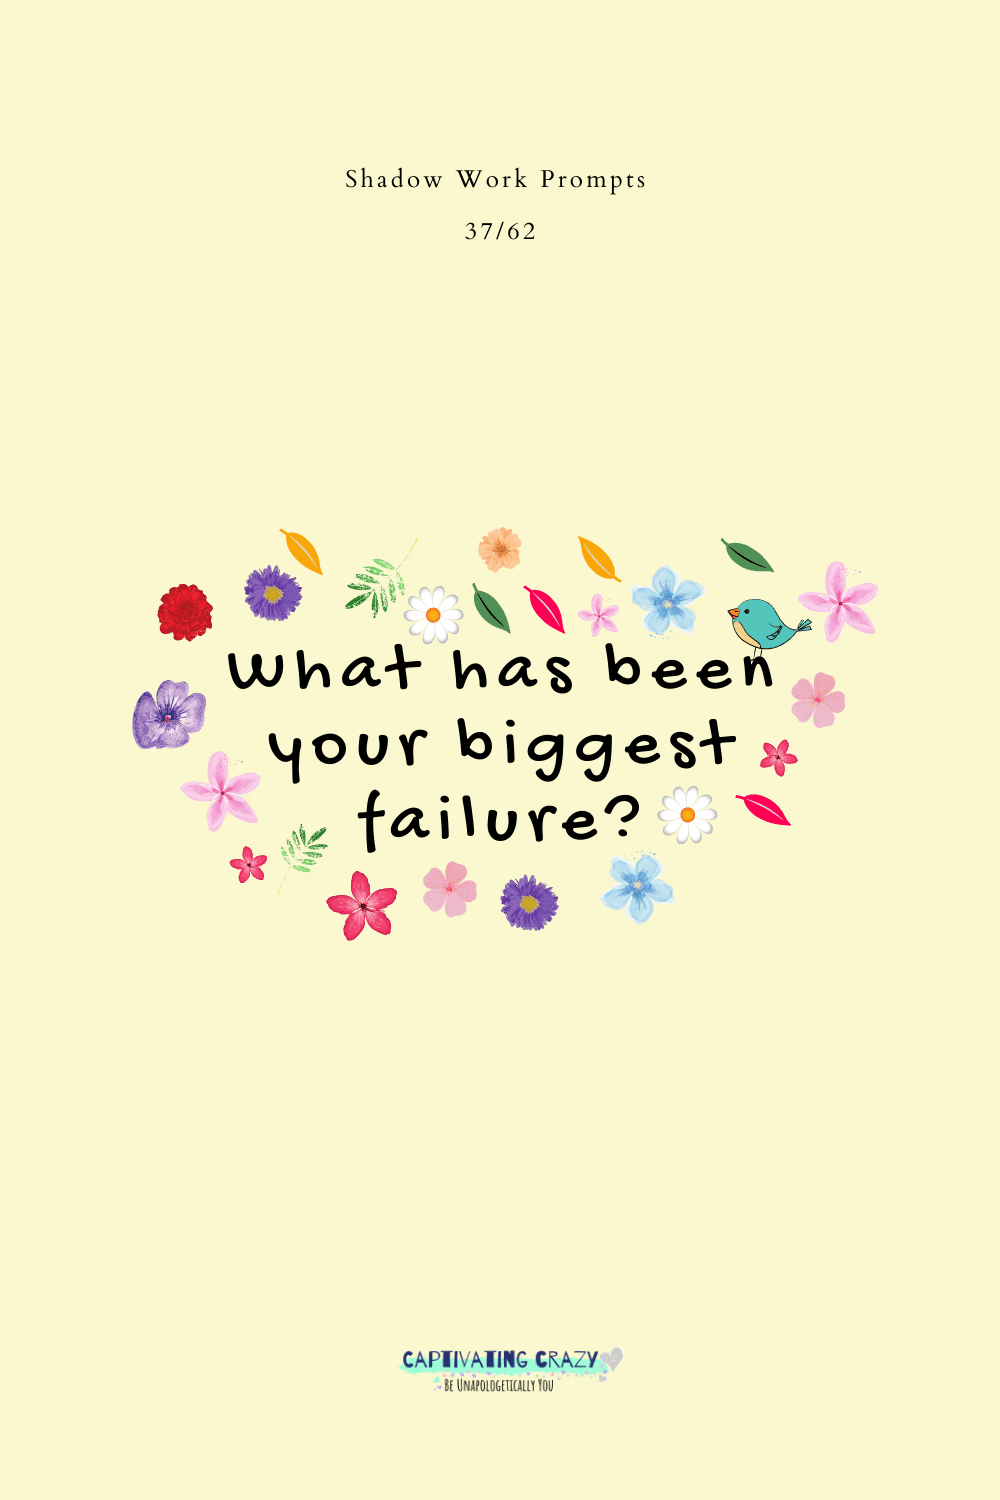 What has been your biggest failure?